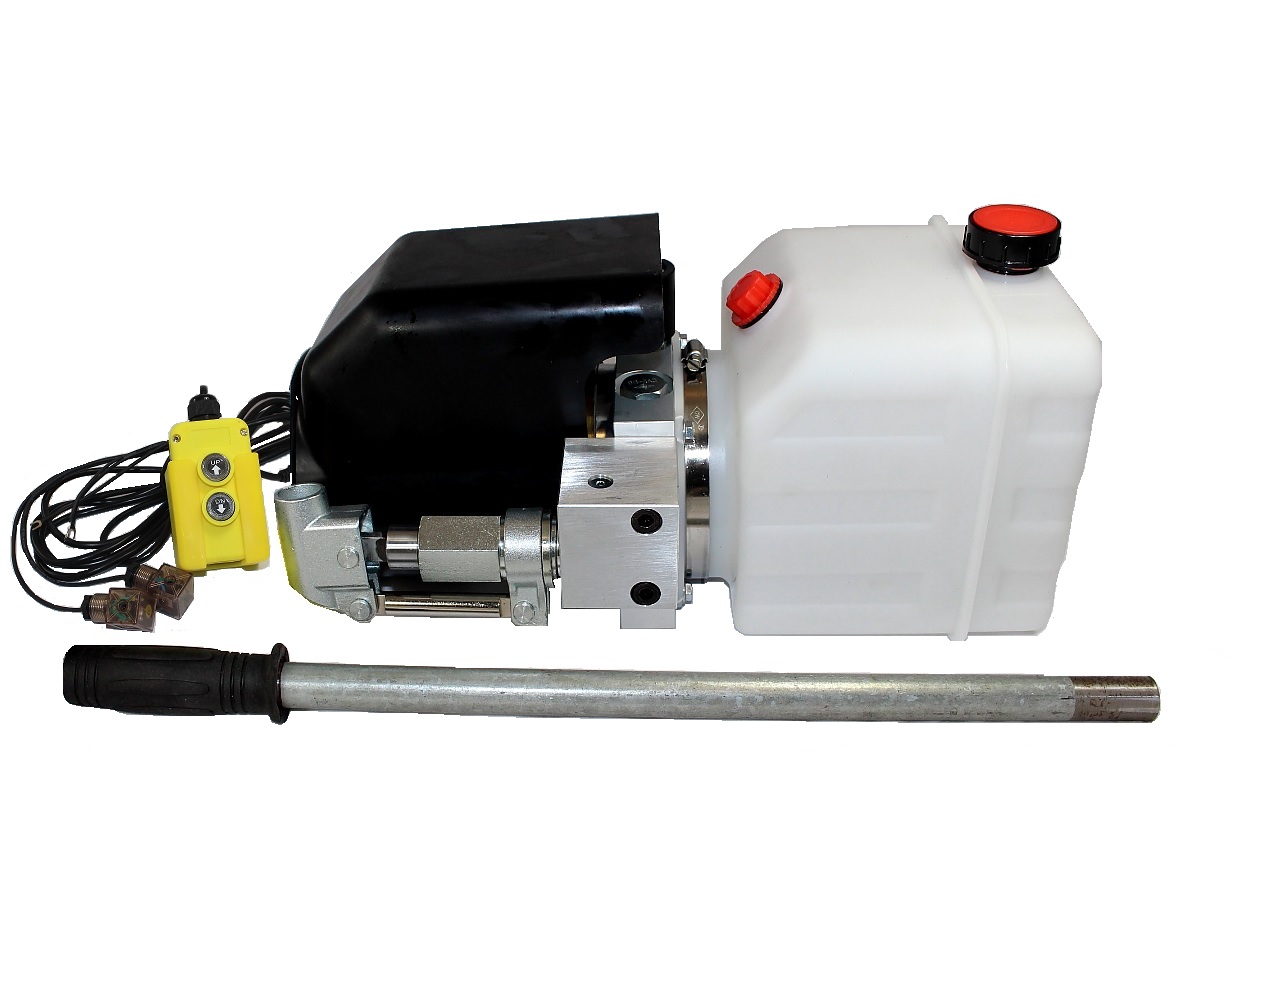 Flowfit 12V DC Single Acting Hydraulic Power pack with 2.5L Tank, Back Up Hand Pump & Wireless Remote 1.6KW